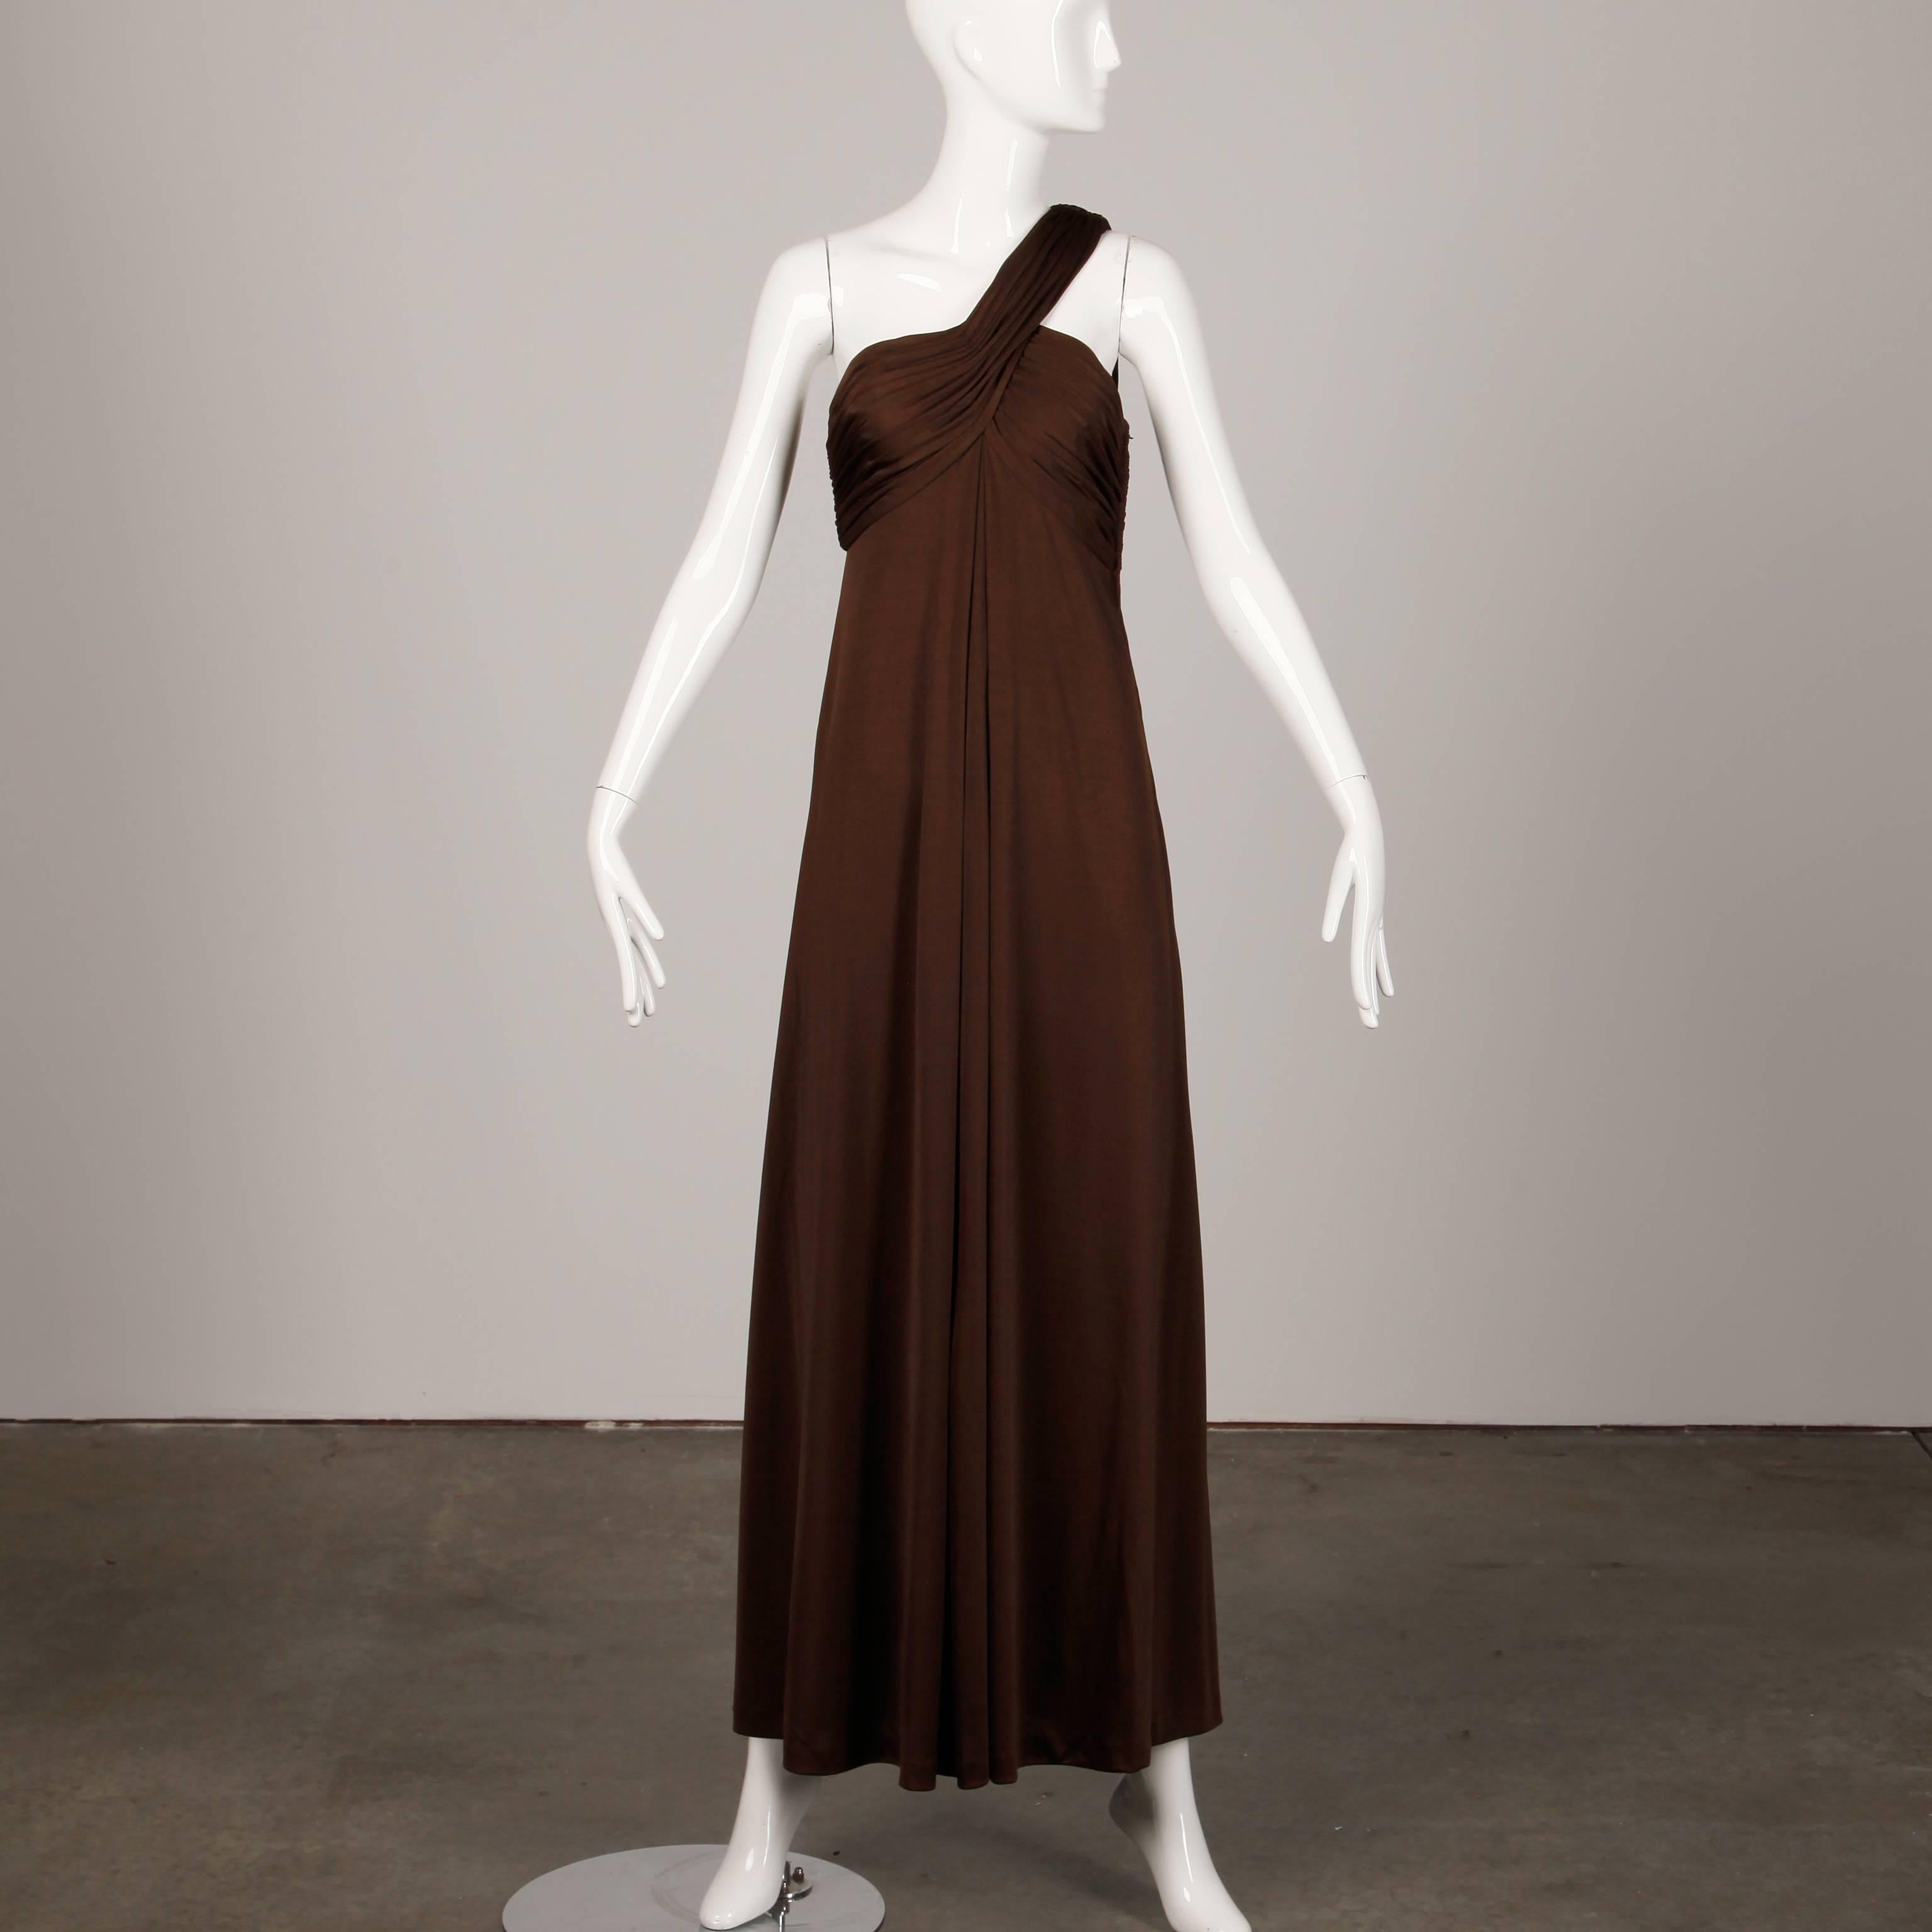 Gorgeous vintage brown jersey knit one-shoulder dress by Estevez. Fully lined, with side zip and hook closure and shoulder hook closure. Light weight slinky high quality jersey knit 100% polyester. The marked size is 6, but the dress fits like a